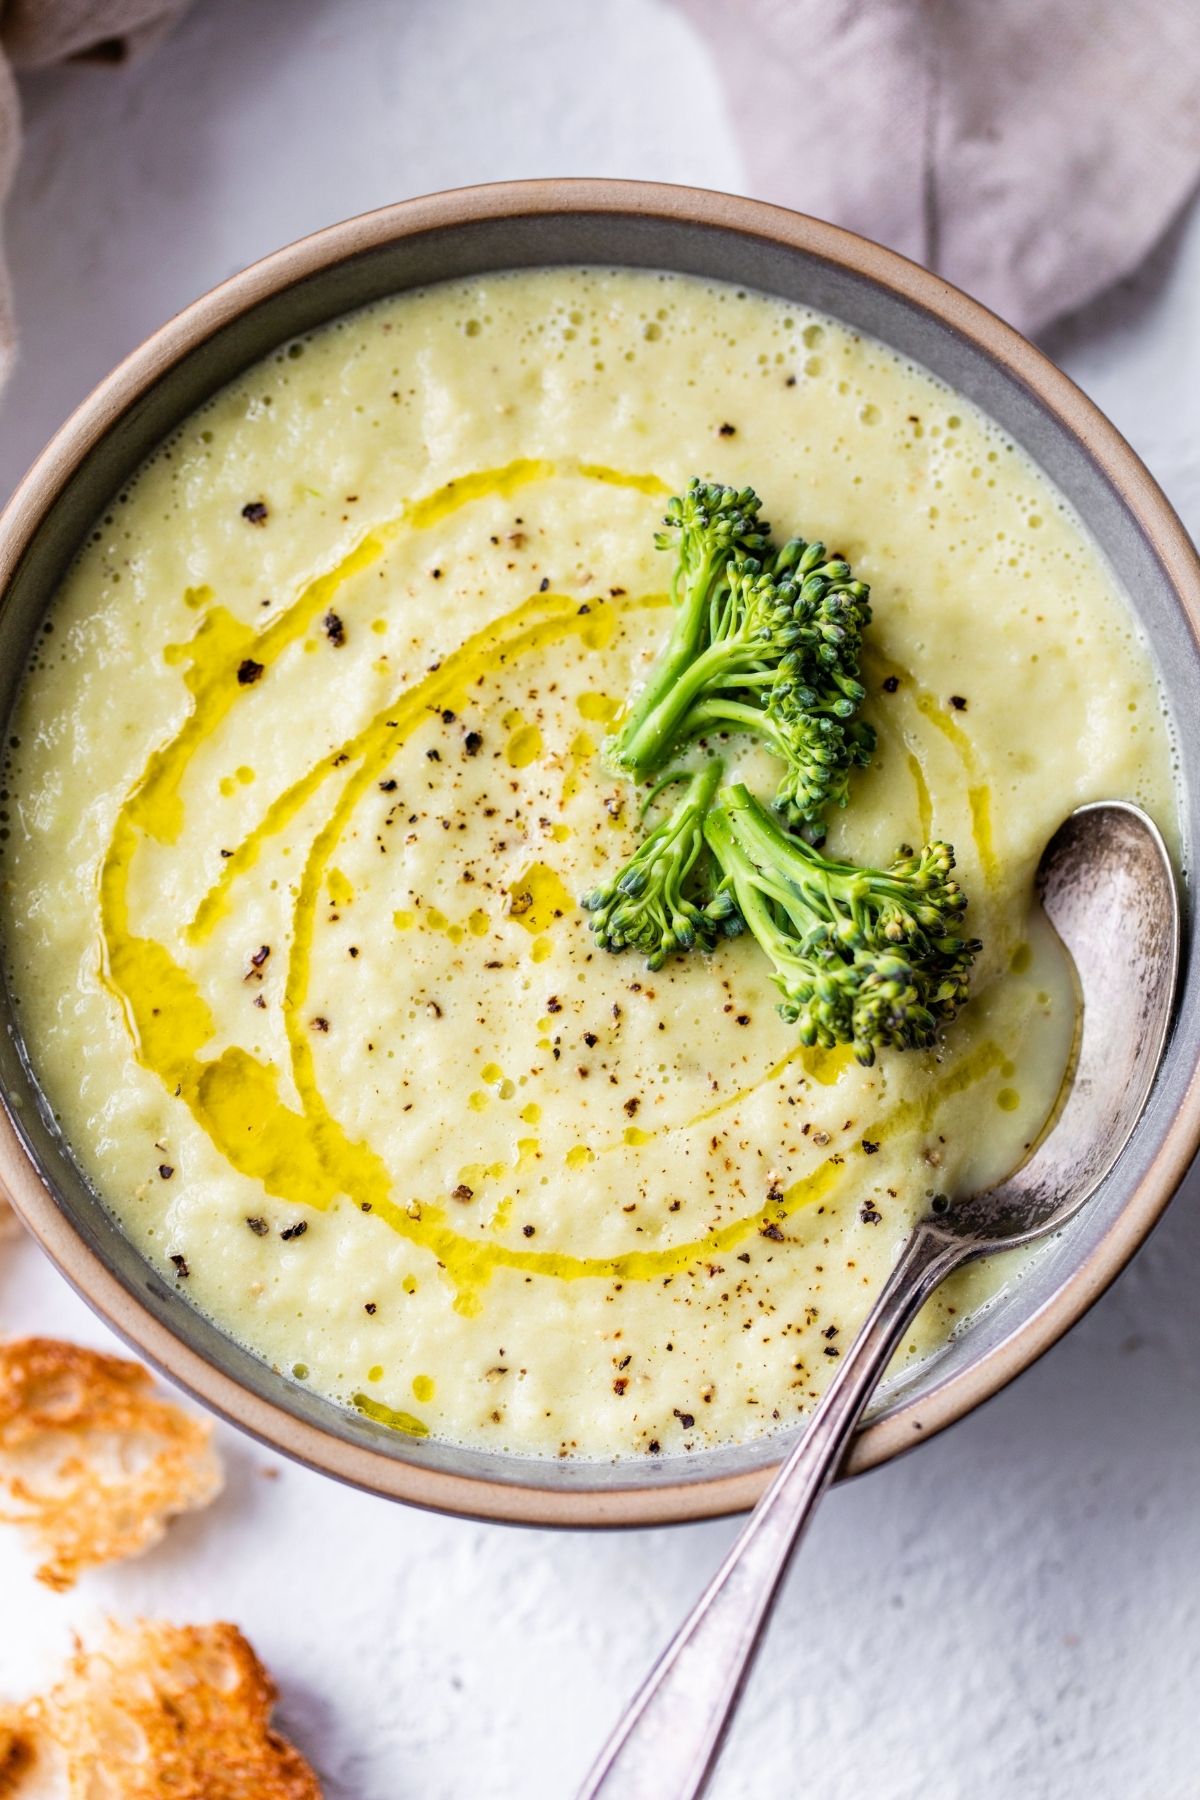 Broccoli stem soup in a bowl with a spoon and topped with a broccoli floret.